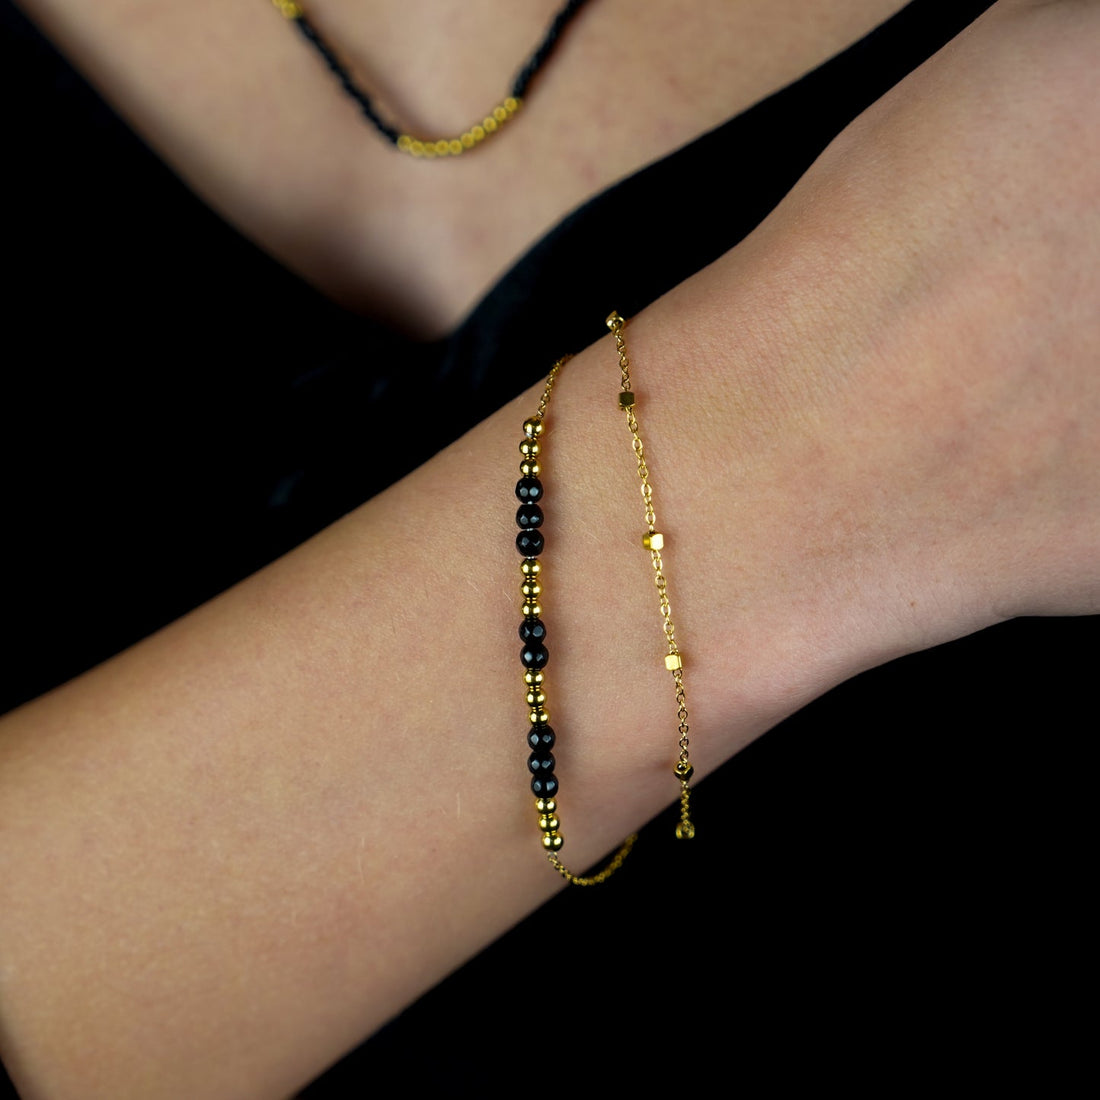 Hackney Nine HILDA Two-in-One Square Beads &amp; Round Beads in Black &amp; Gold Bracelet.